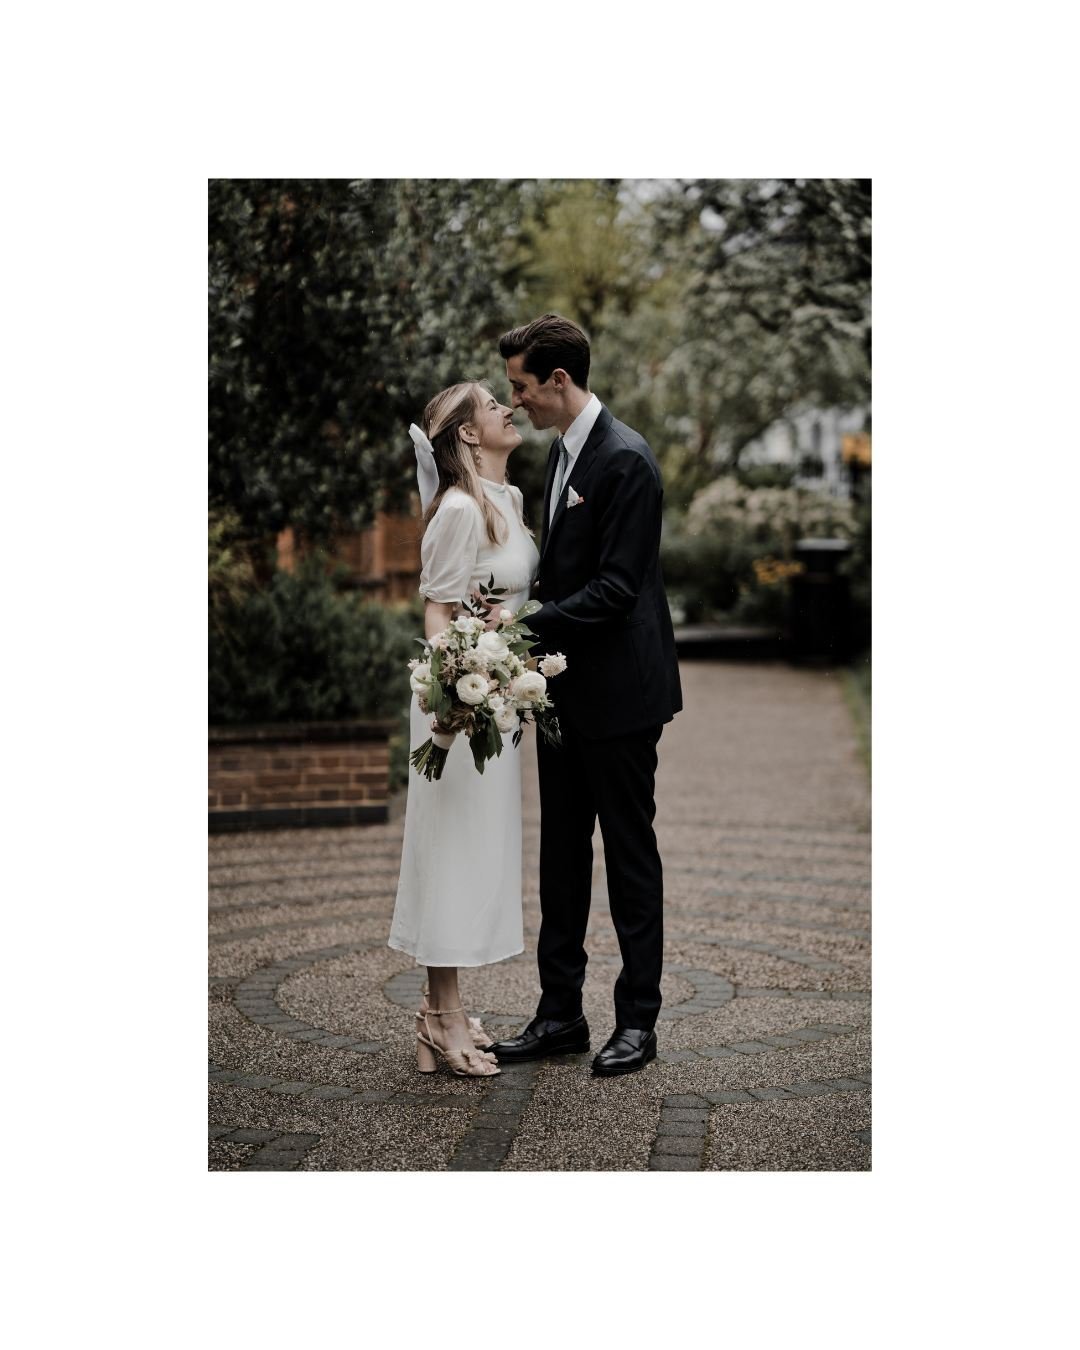 CAPTURING LOVE⁠
.⁠
Lucy &amp; Rory's London wedding was a celebration of love, laughter, and unforgettable moments. We were thrilled to be a part of their special day, and their heartfelt testimonial truly warmed our hearts.⁠
.⁠
&quot;We were totally